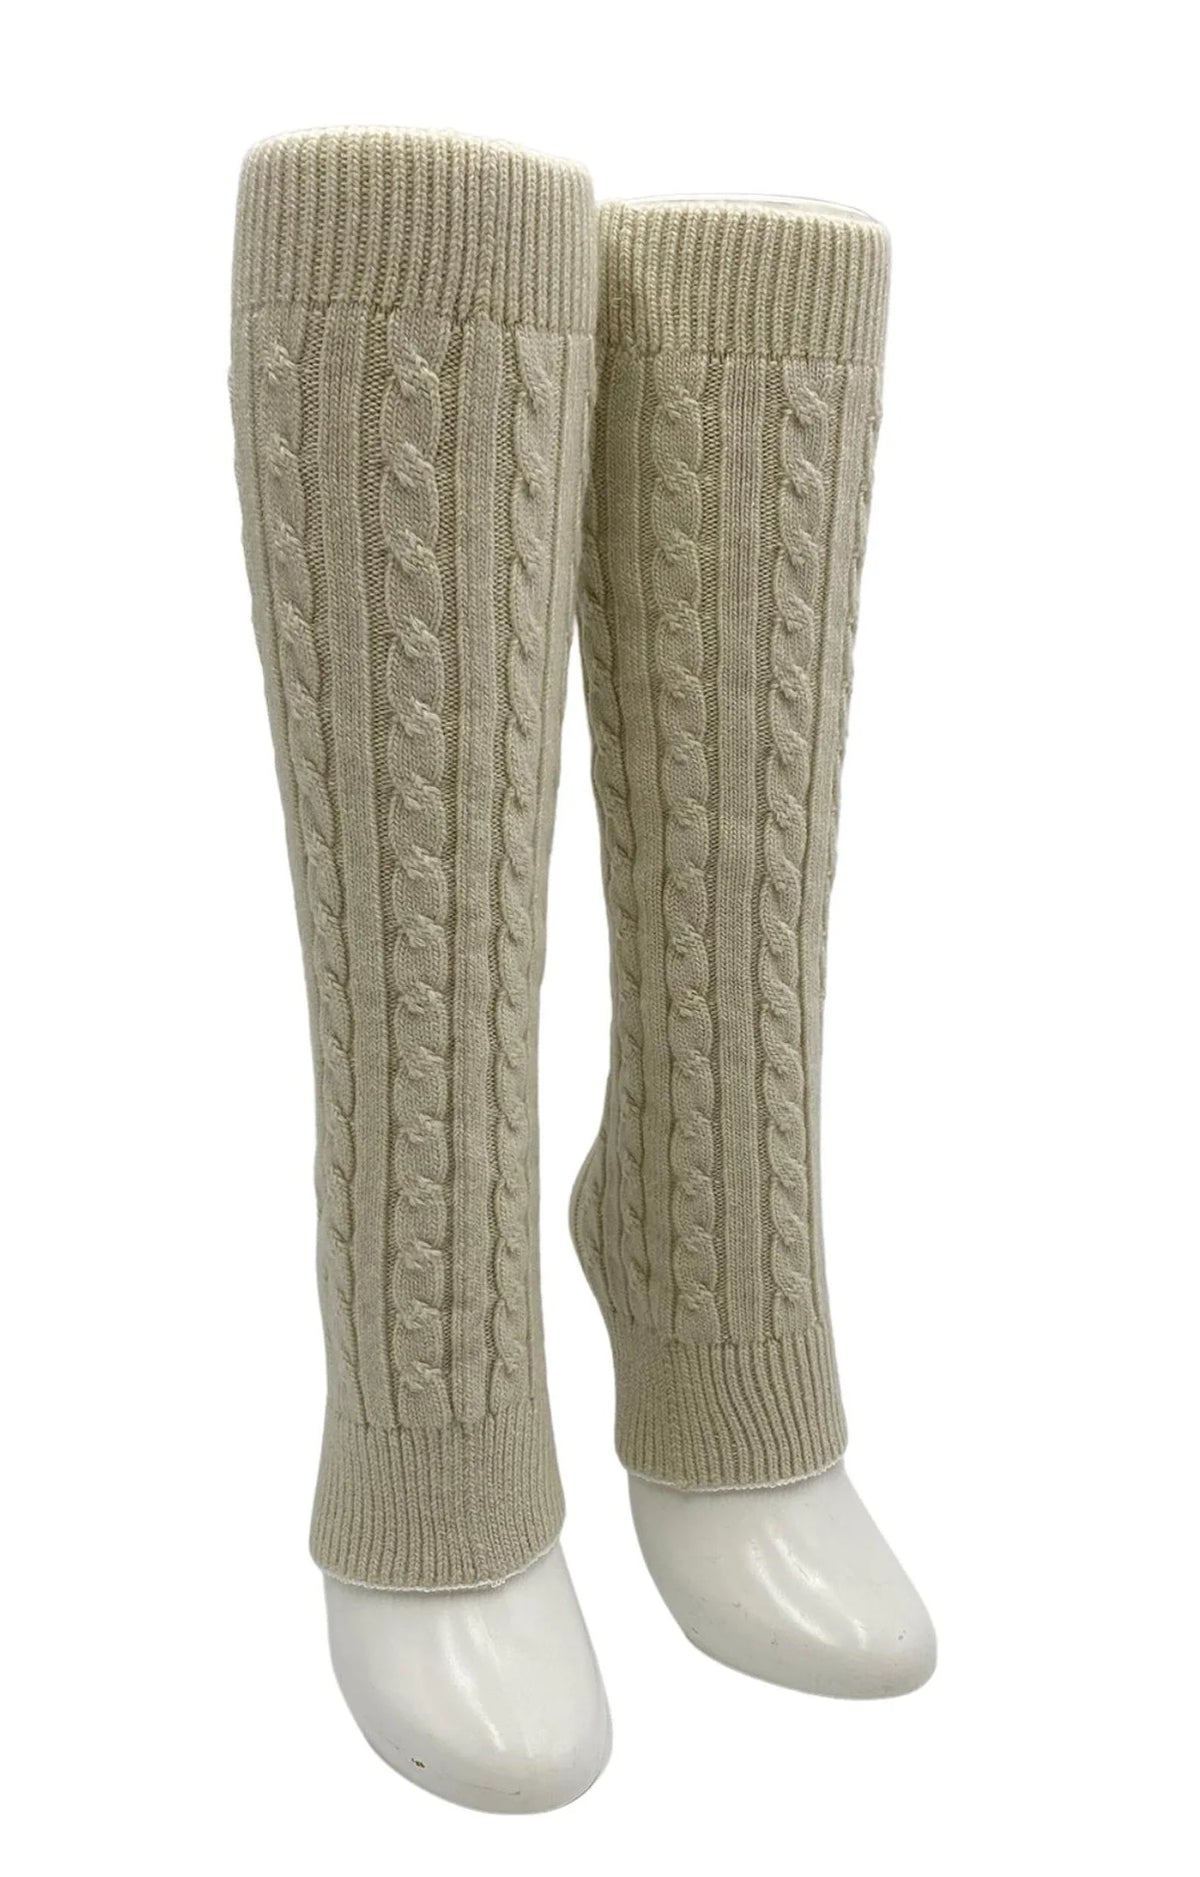 Leg Warmer by Knitido plus named Wool Blend Cable Leg Warmer, Ivory color